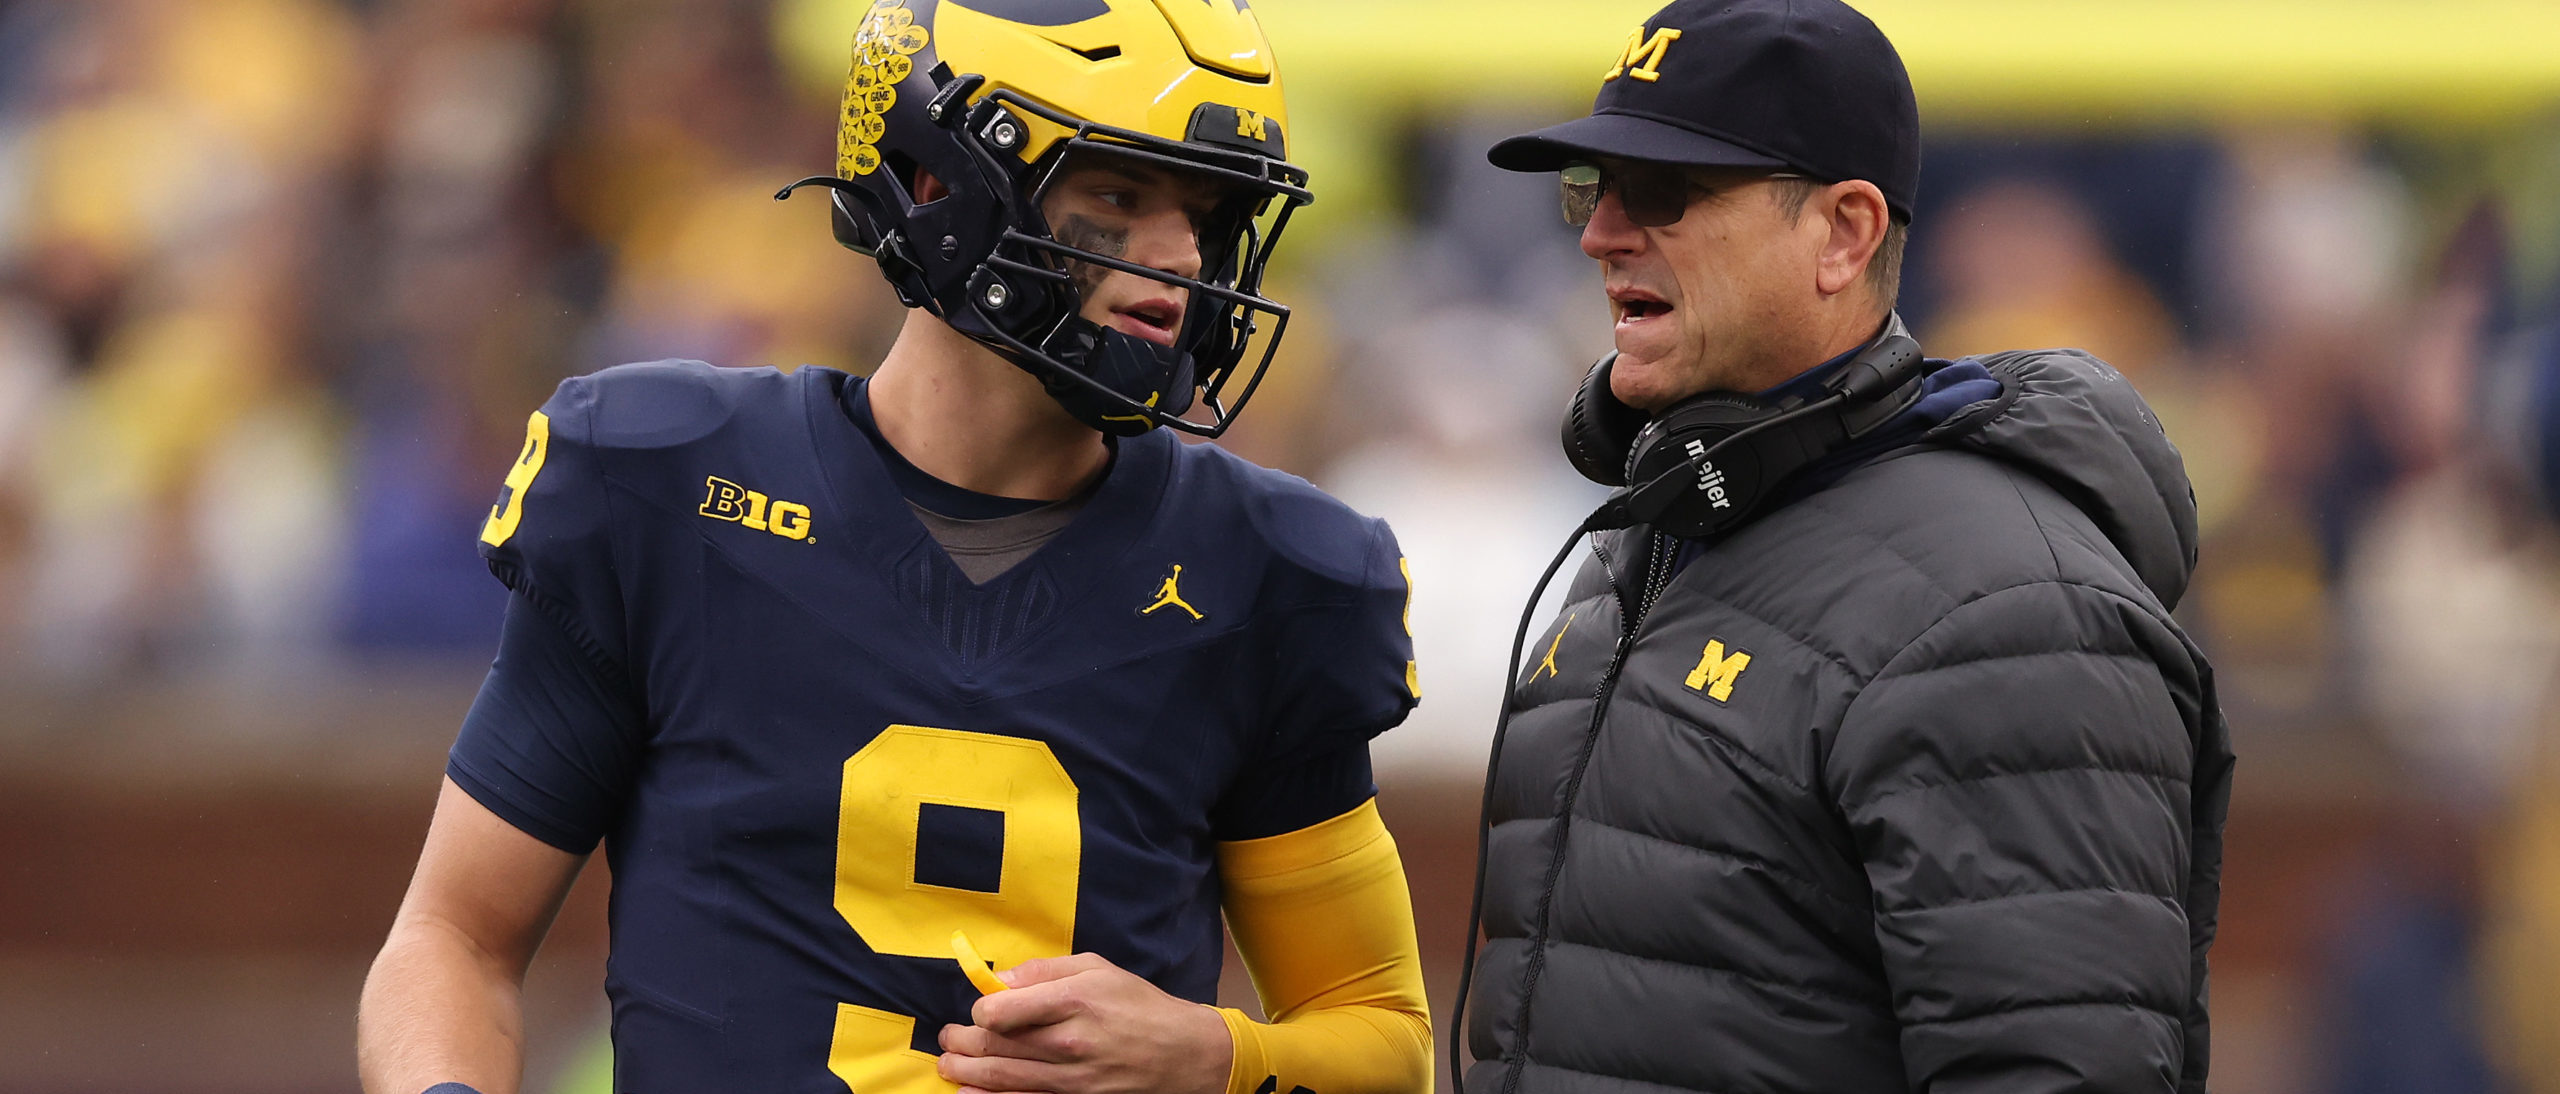 Is This An Admission Of Guilt? Michigan's Jim Harbaugh Reportedly Accepts  3-Game Suspension From Big Ten | The Daily Caller